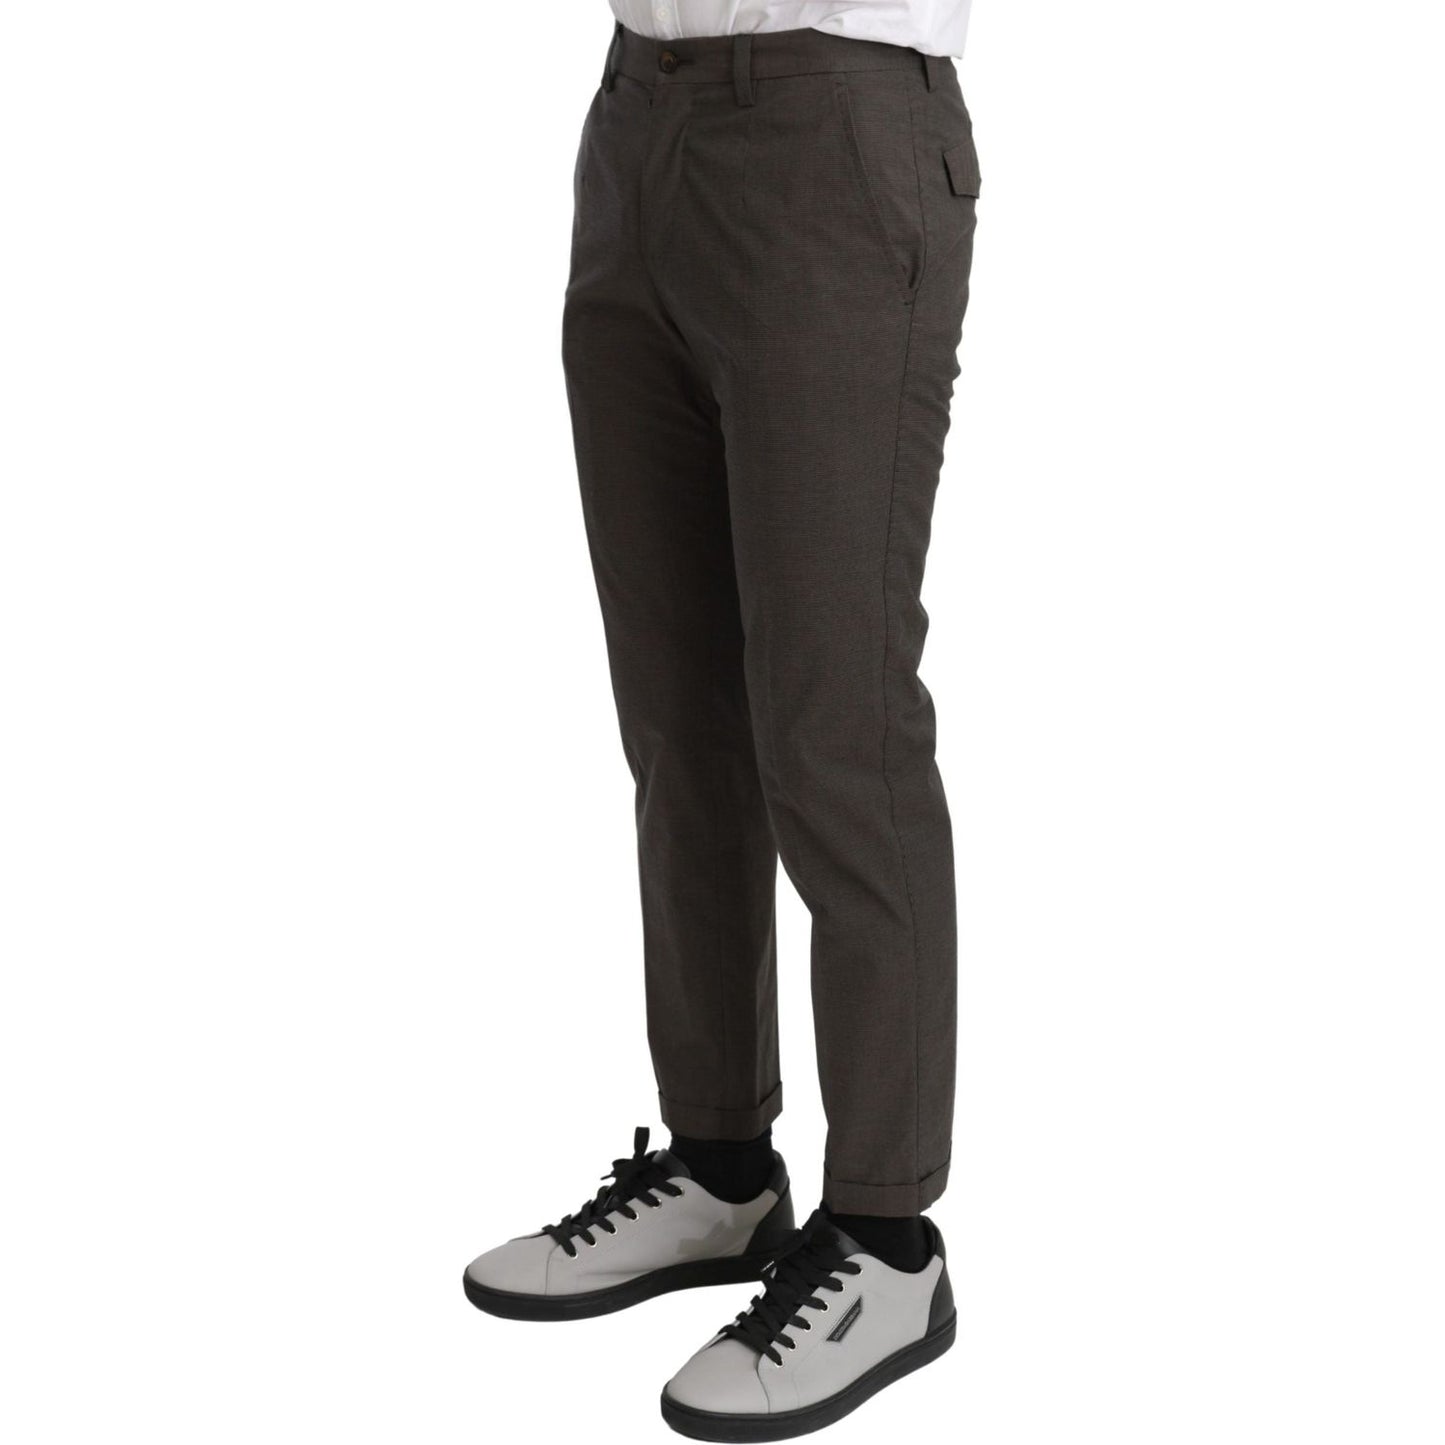 Dolce & Gabbana Elegant Brown Casual Pants brown-casual-mens-trouser-100-cotton-pants IMG_2805-scaled-11f8974e-5c7.jpg